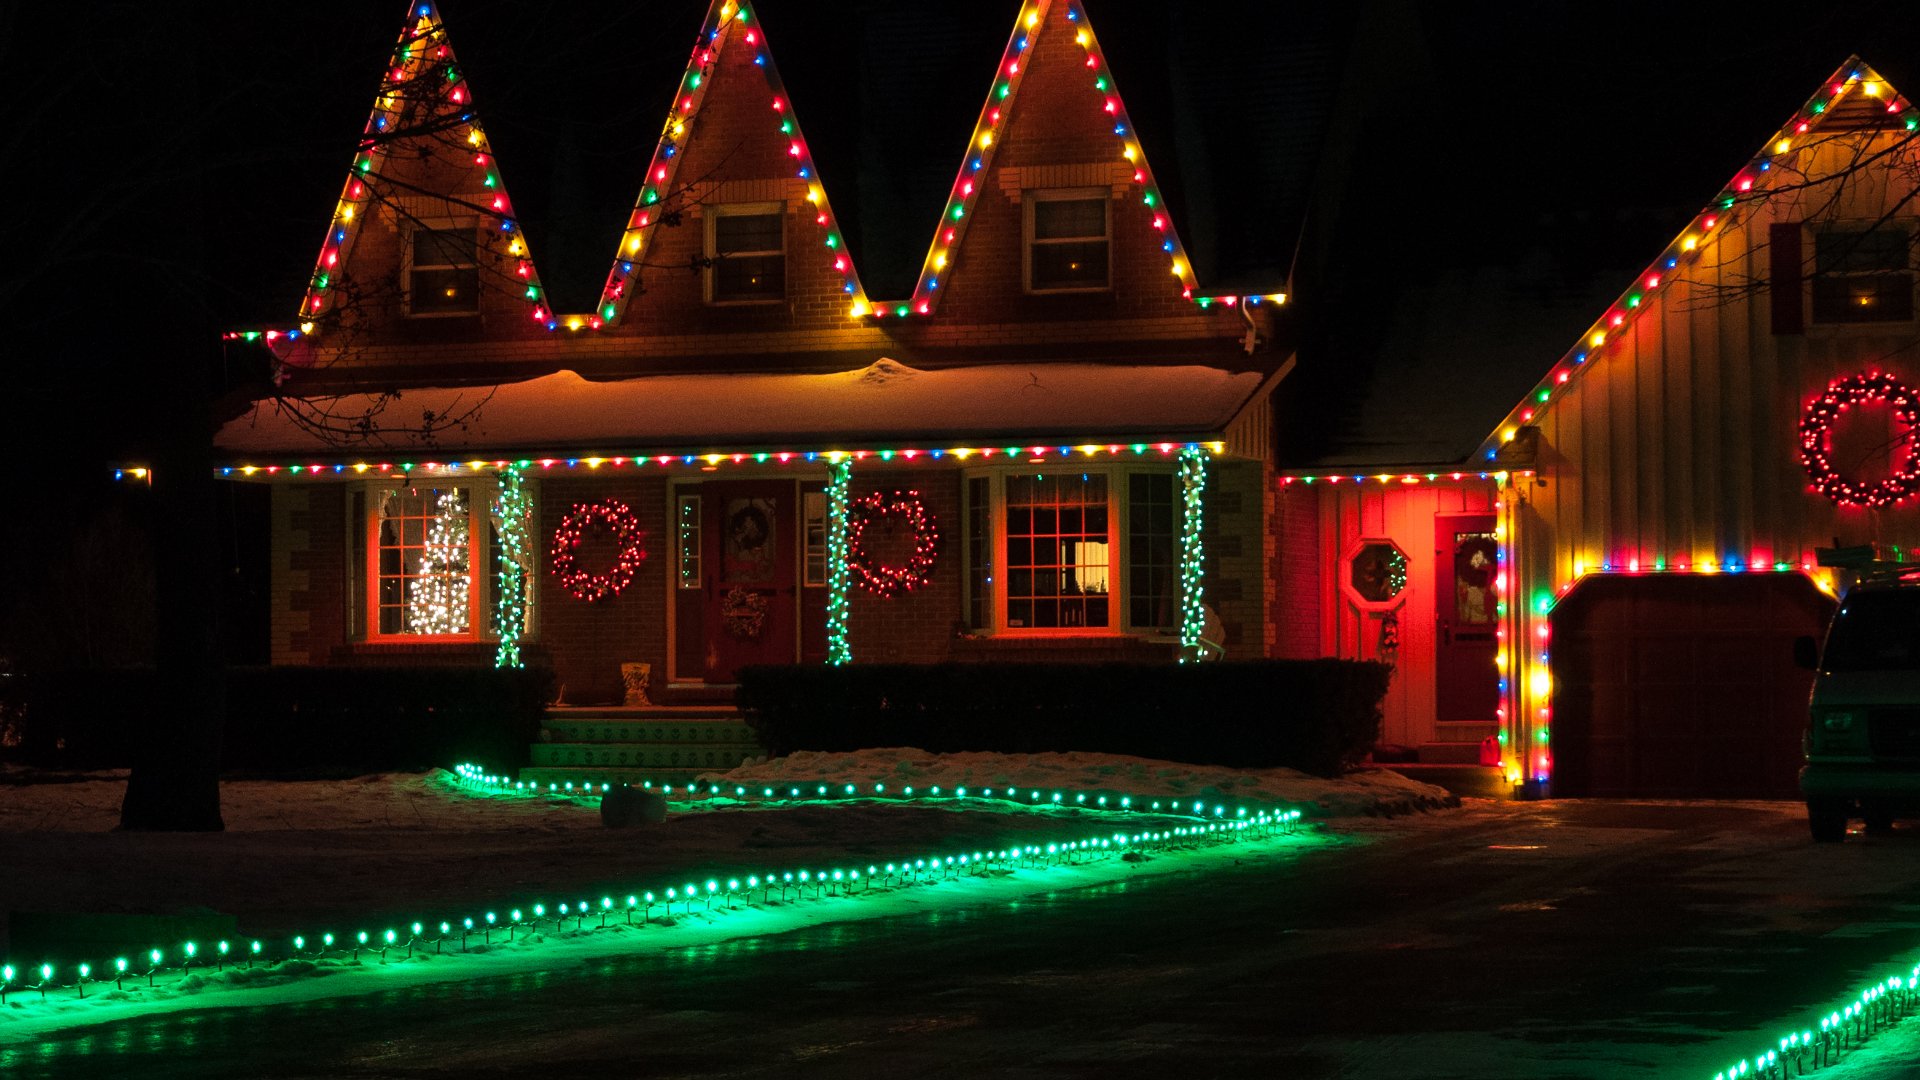 Here's What to Expect When You Leave Holiday Lighting to the Pros